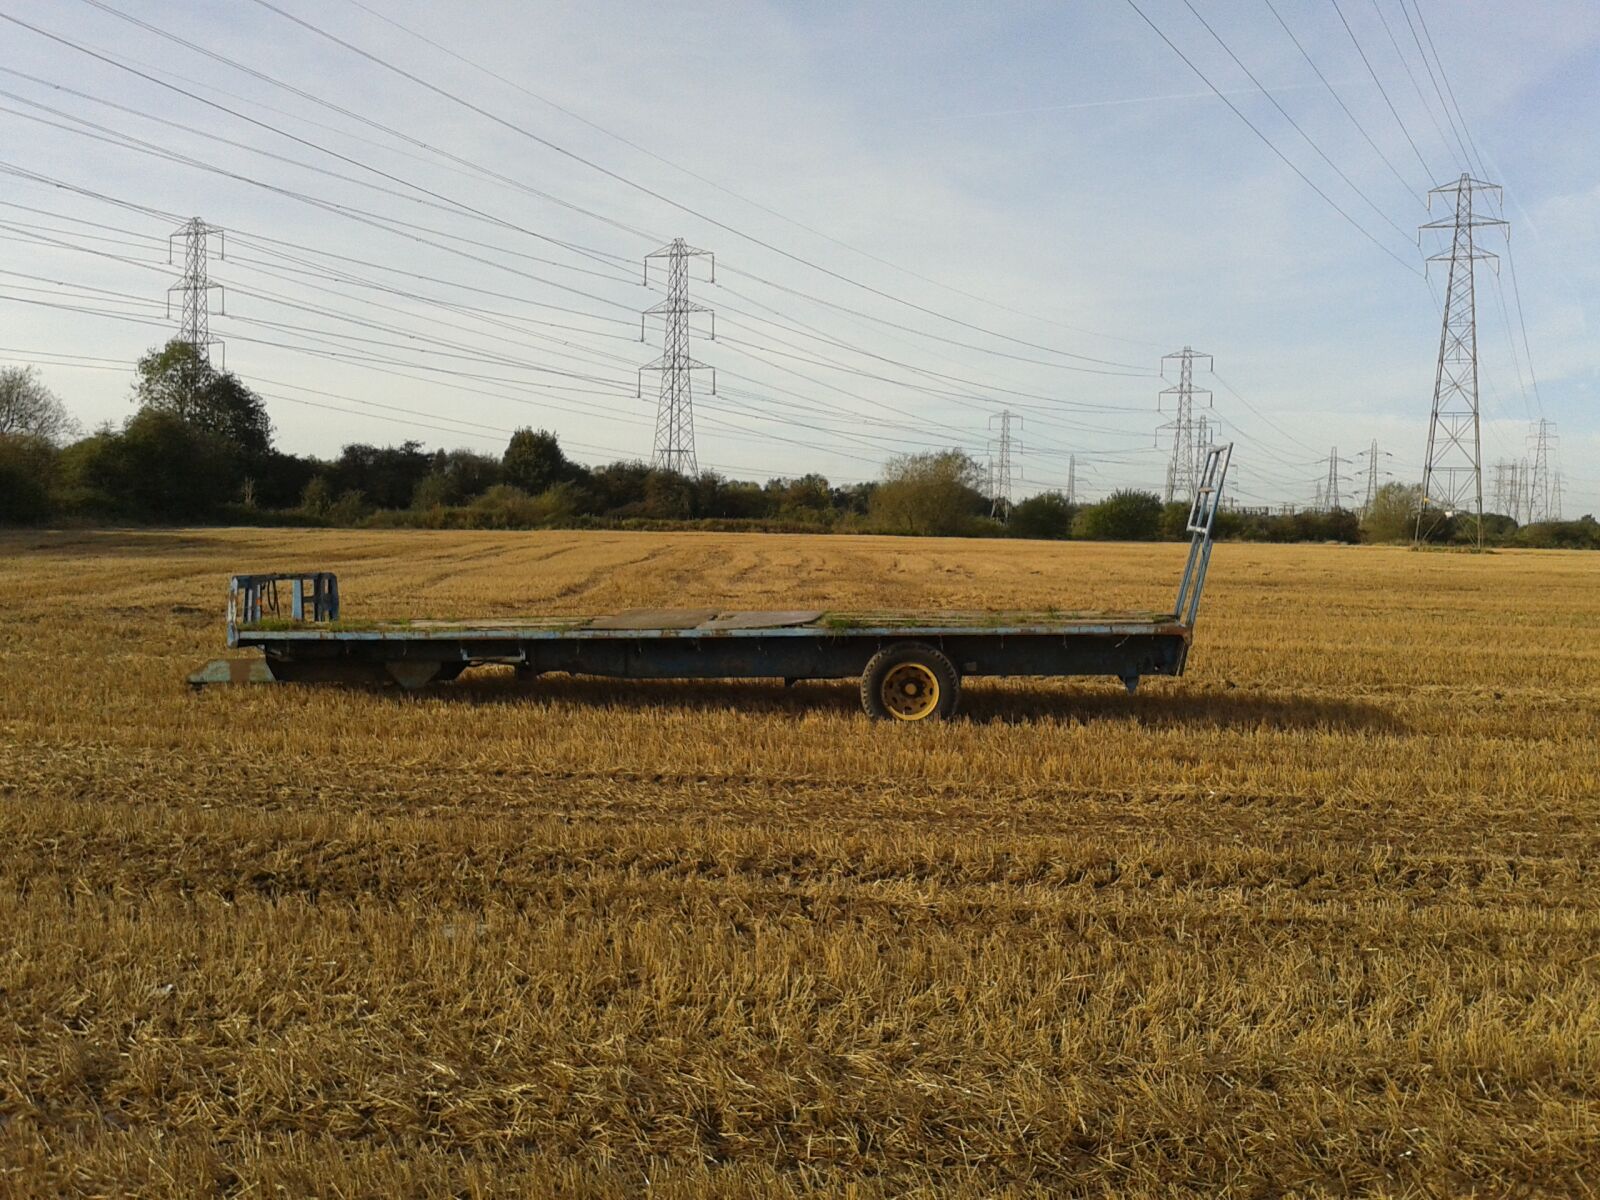 Samsung Galaxy Fame sample photo. Field, pylons, tractor, trailer photography